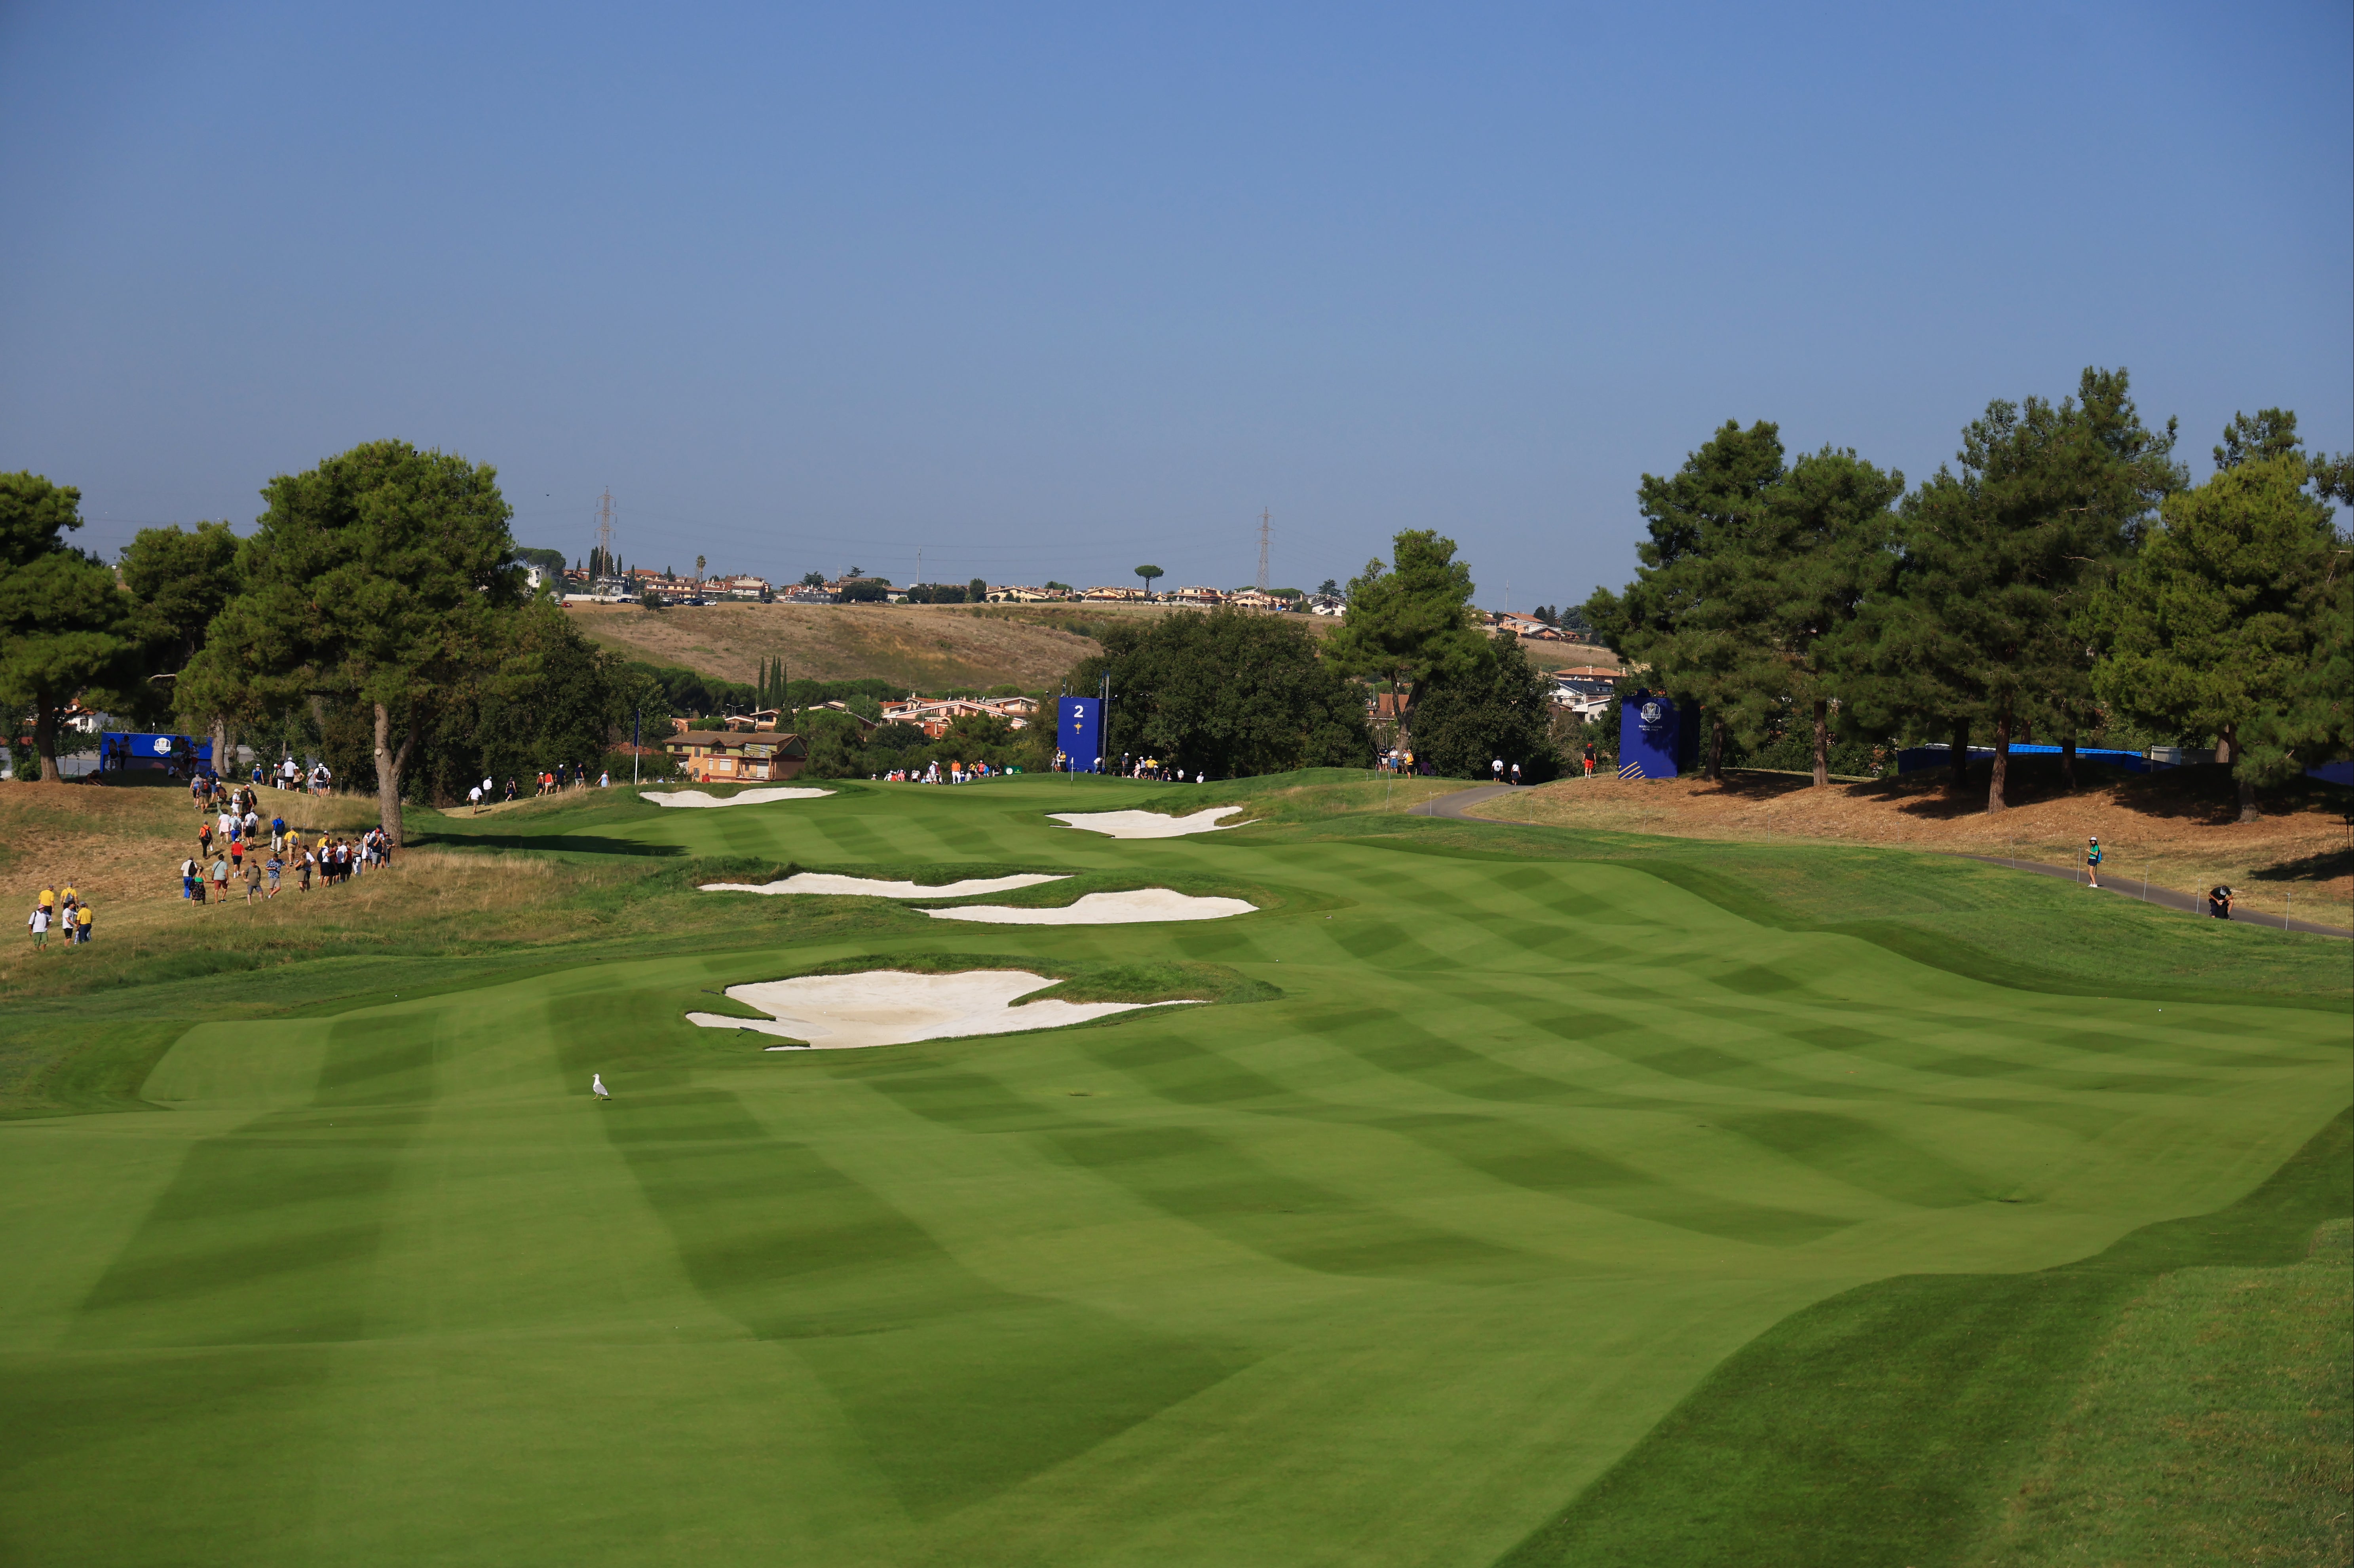 The Marco Simone Golf and Country Club will host the 44th edition of the Ryder Cup